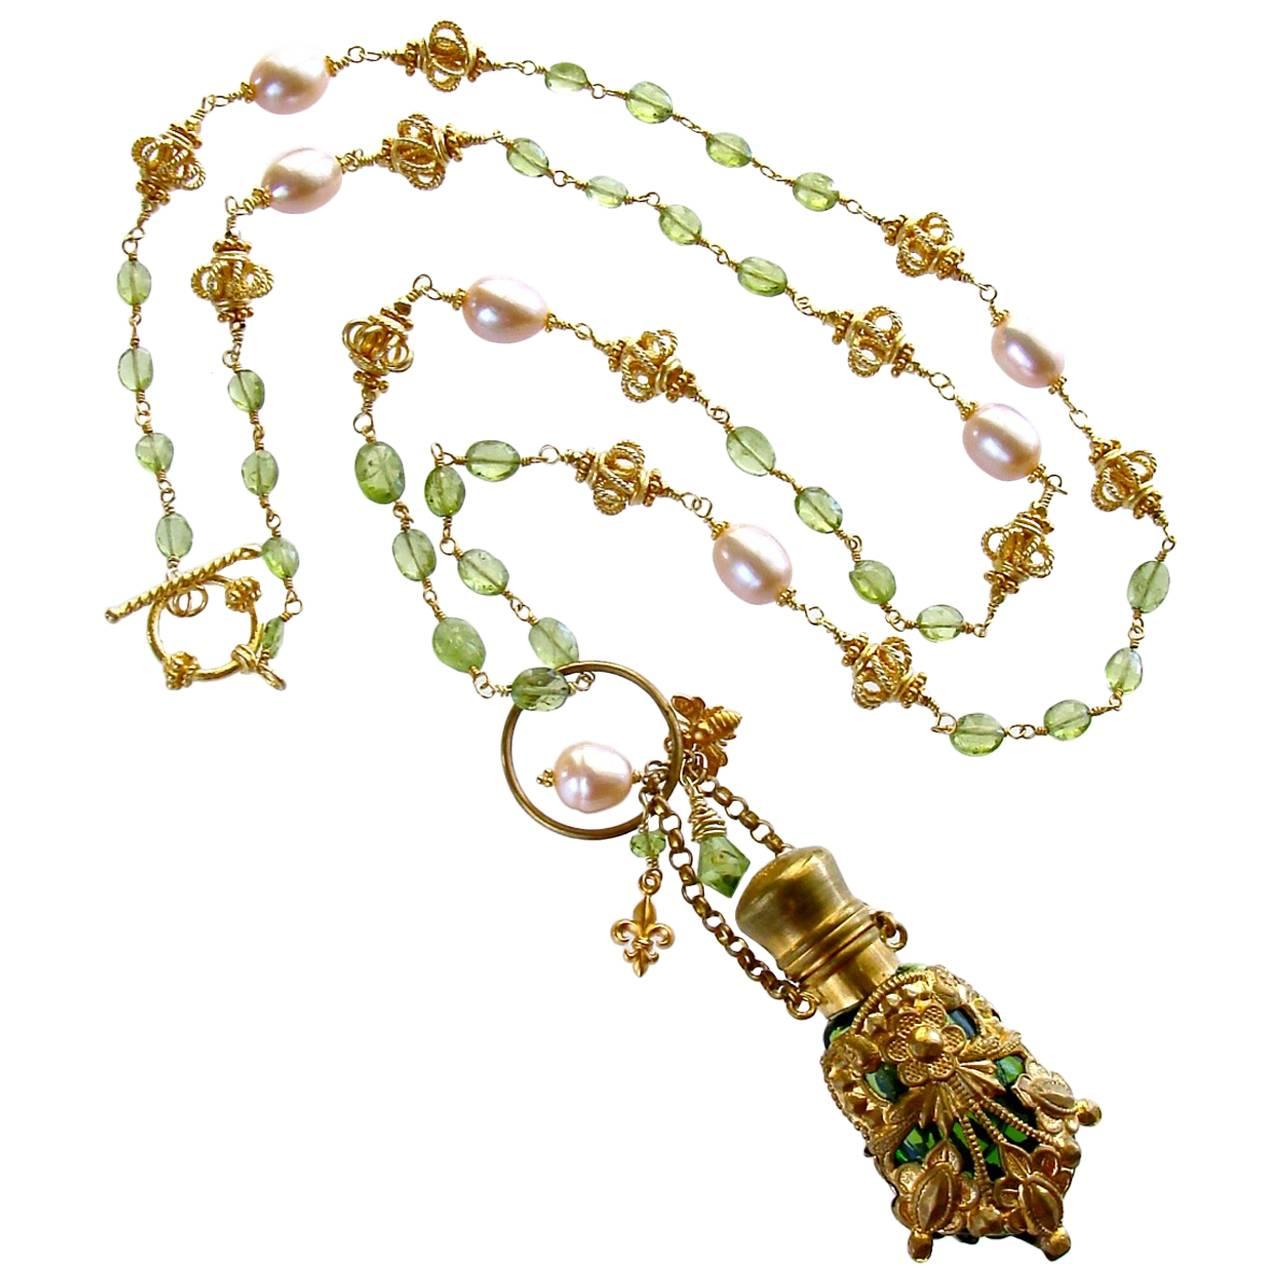 Victorian Chatelaine Scent Bottle Necklace Peridot Pink Pearls